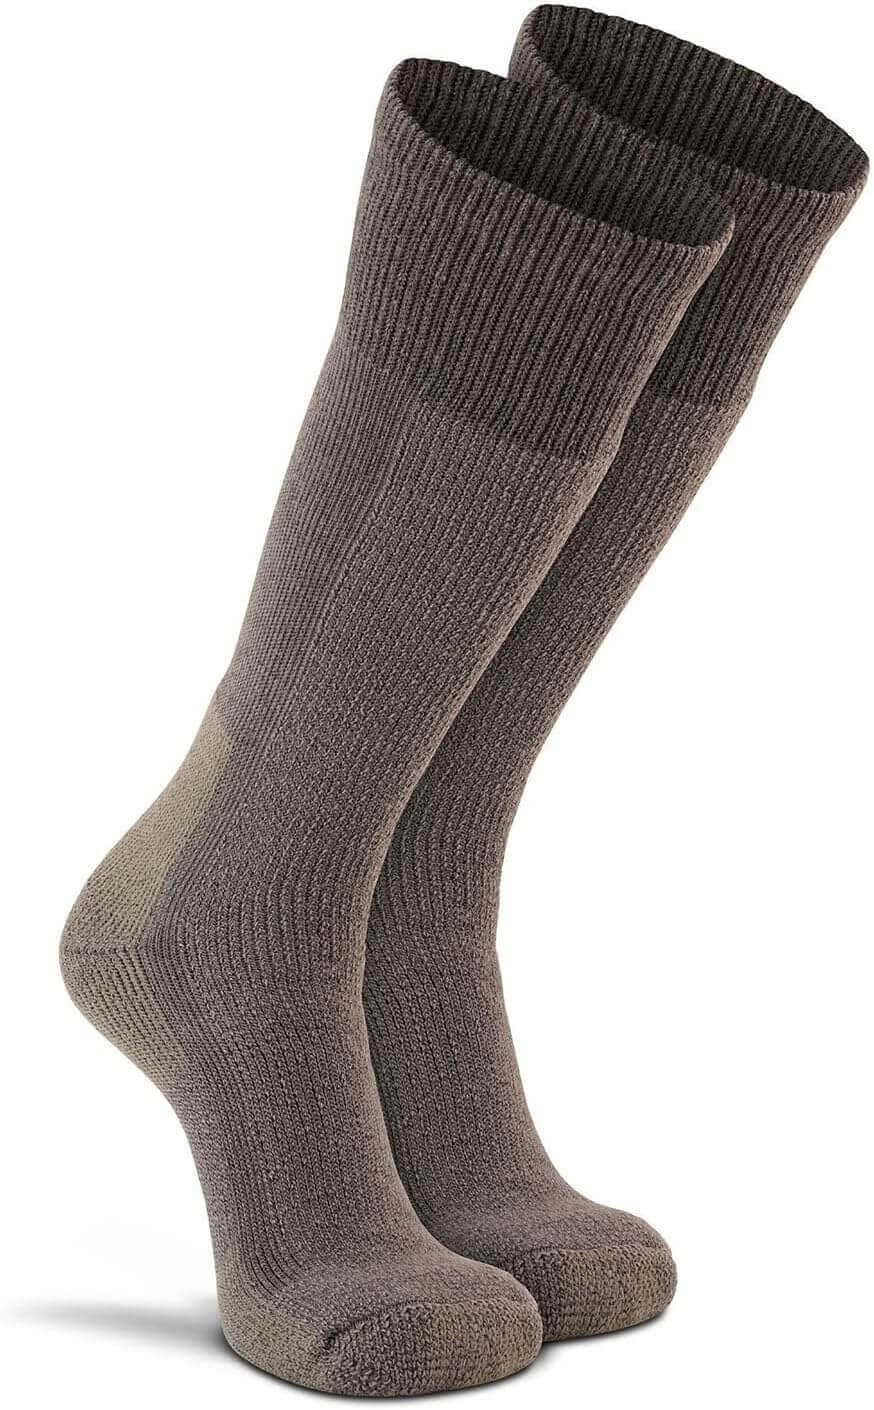 Shop The Latest >Fox River Adult Cold Weather Mid Calf Boot Socks > *Only $22.42*> From The Top Brand > *Fox Riverl* > Shop Now and Get Free Shipping On Orders Over $45.00 >*Shop Earth Foot*